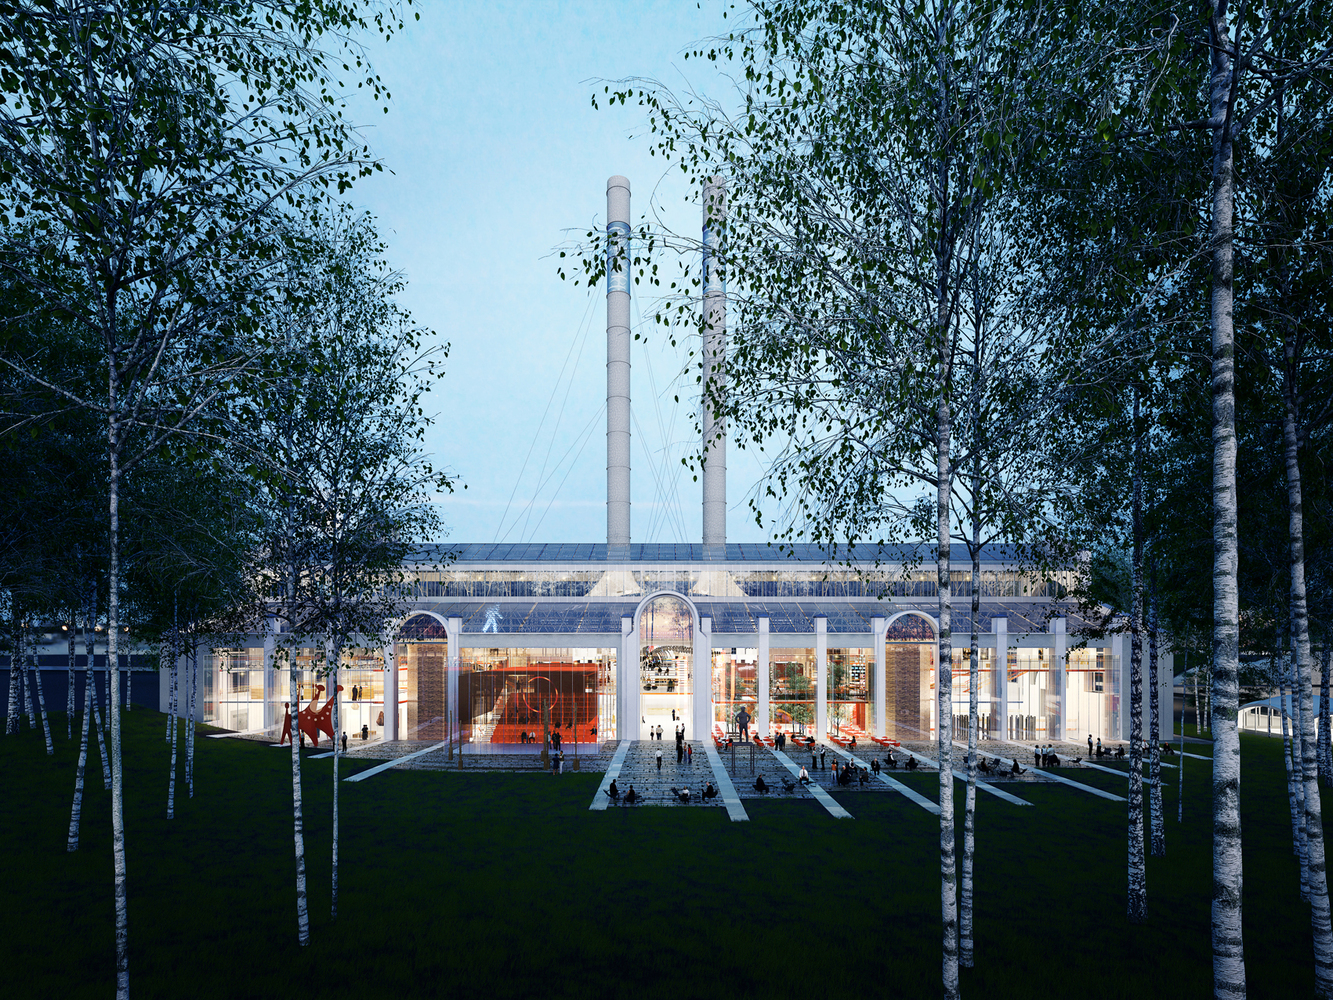 GES2 power station conversion by Renzo Piano